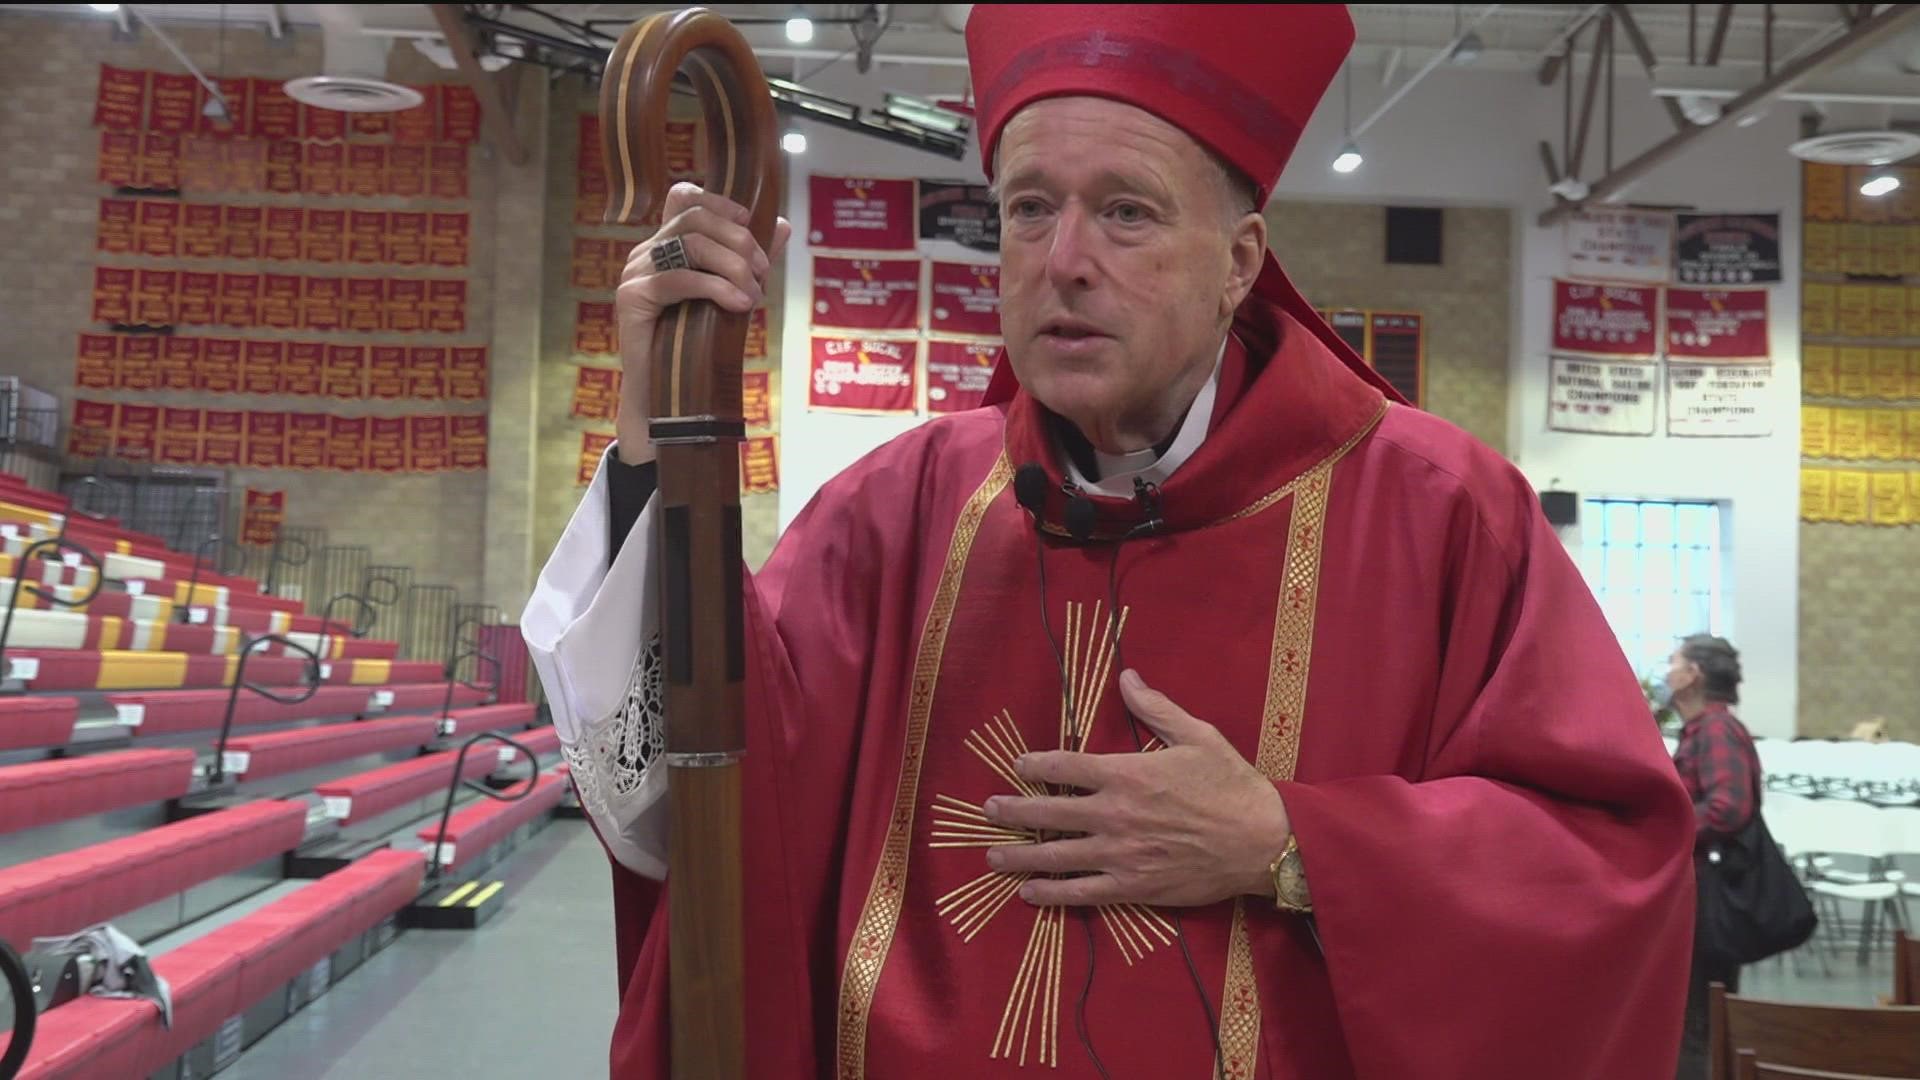 The mass was conducted by Cardinal Designate Robert McElroy, his first mass appearance since the announcement of his new role in the universal church.